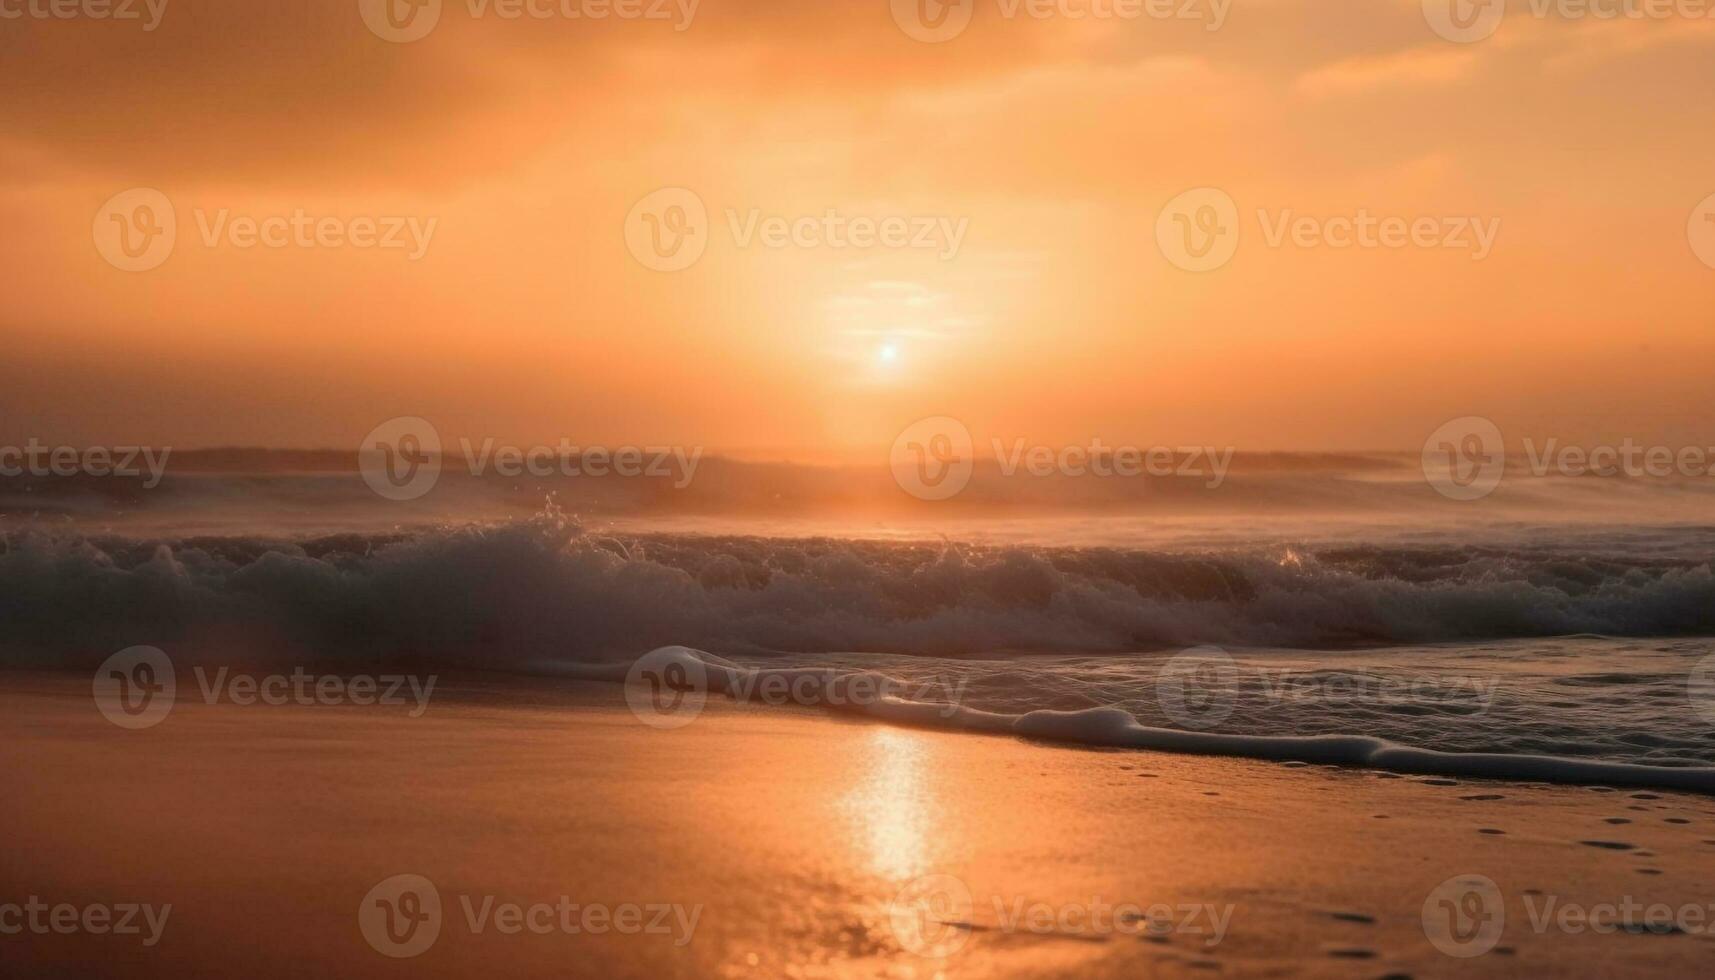 The golden sun sets over the tranquil waters, reflecting beauty generated by AI photo